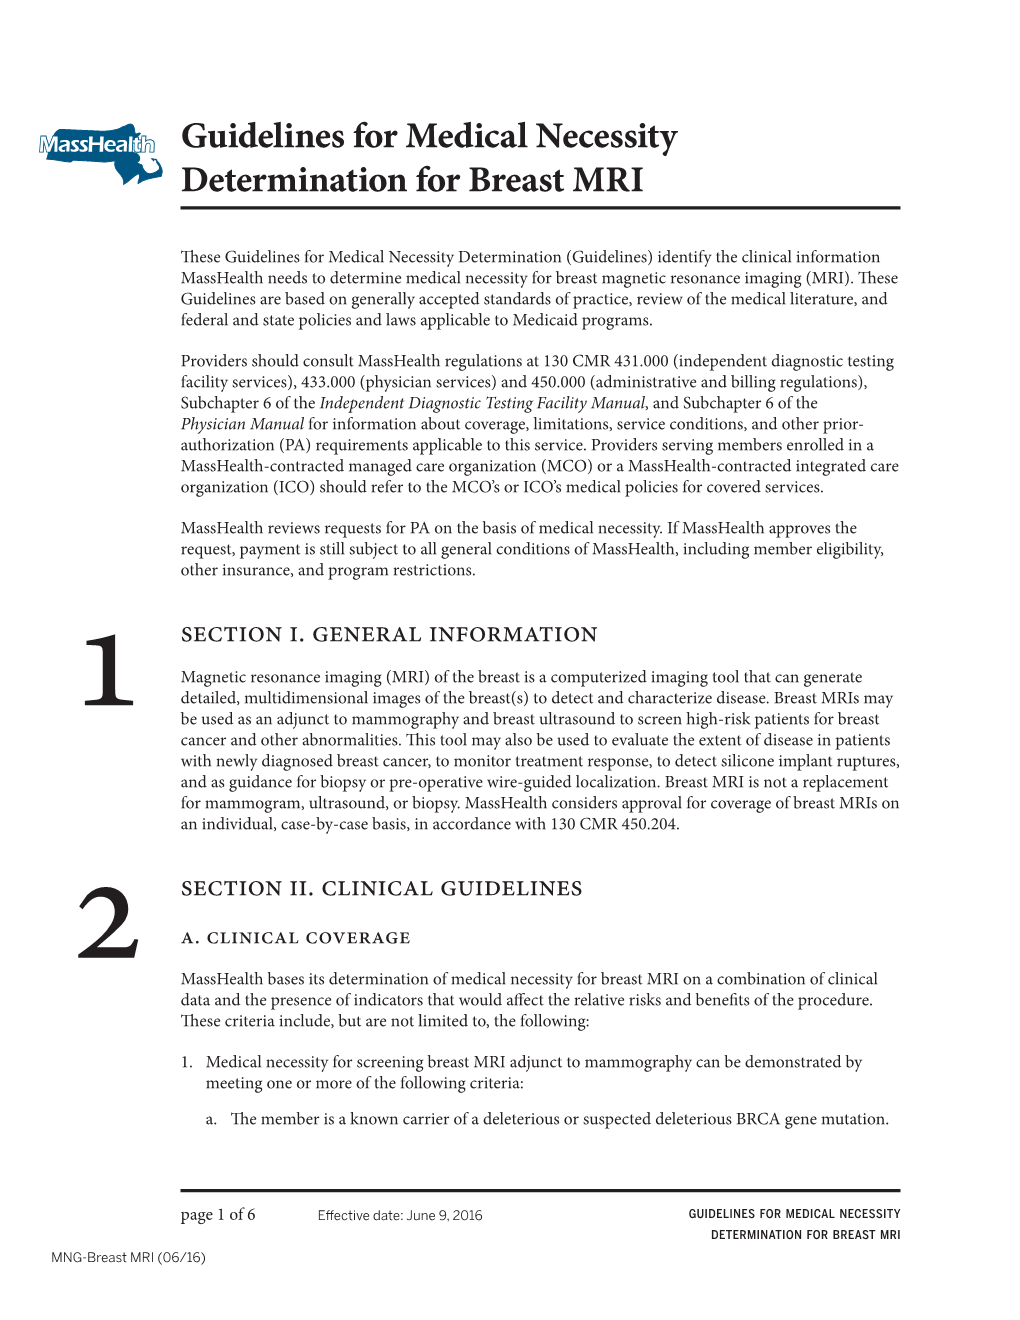 Guidelines for Medical Necessity Determination for Breast MRI